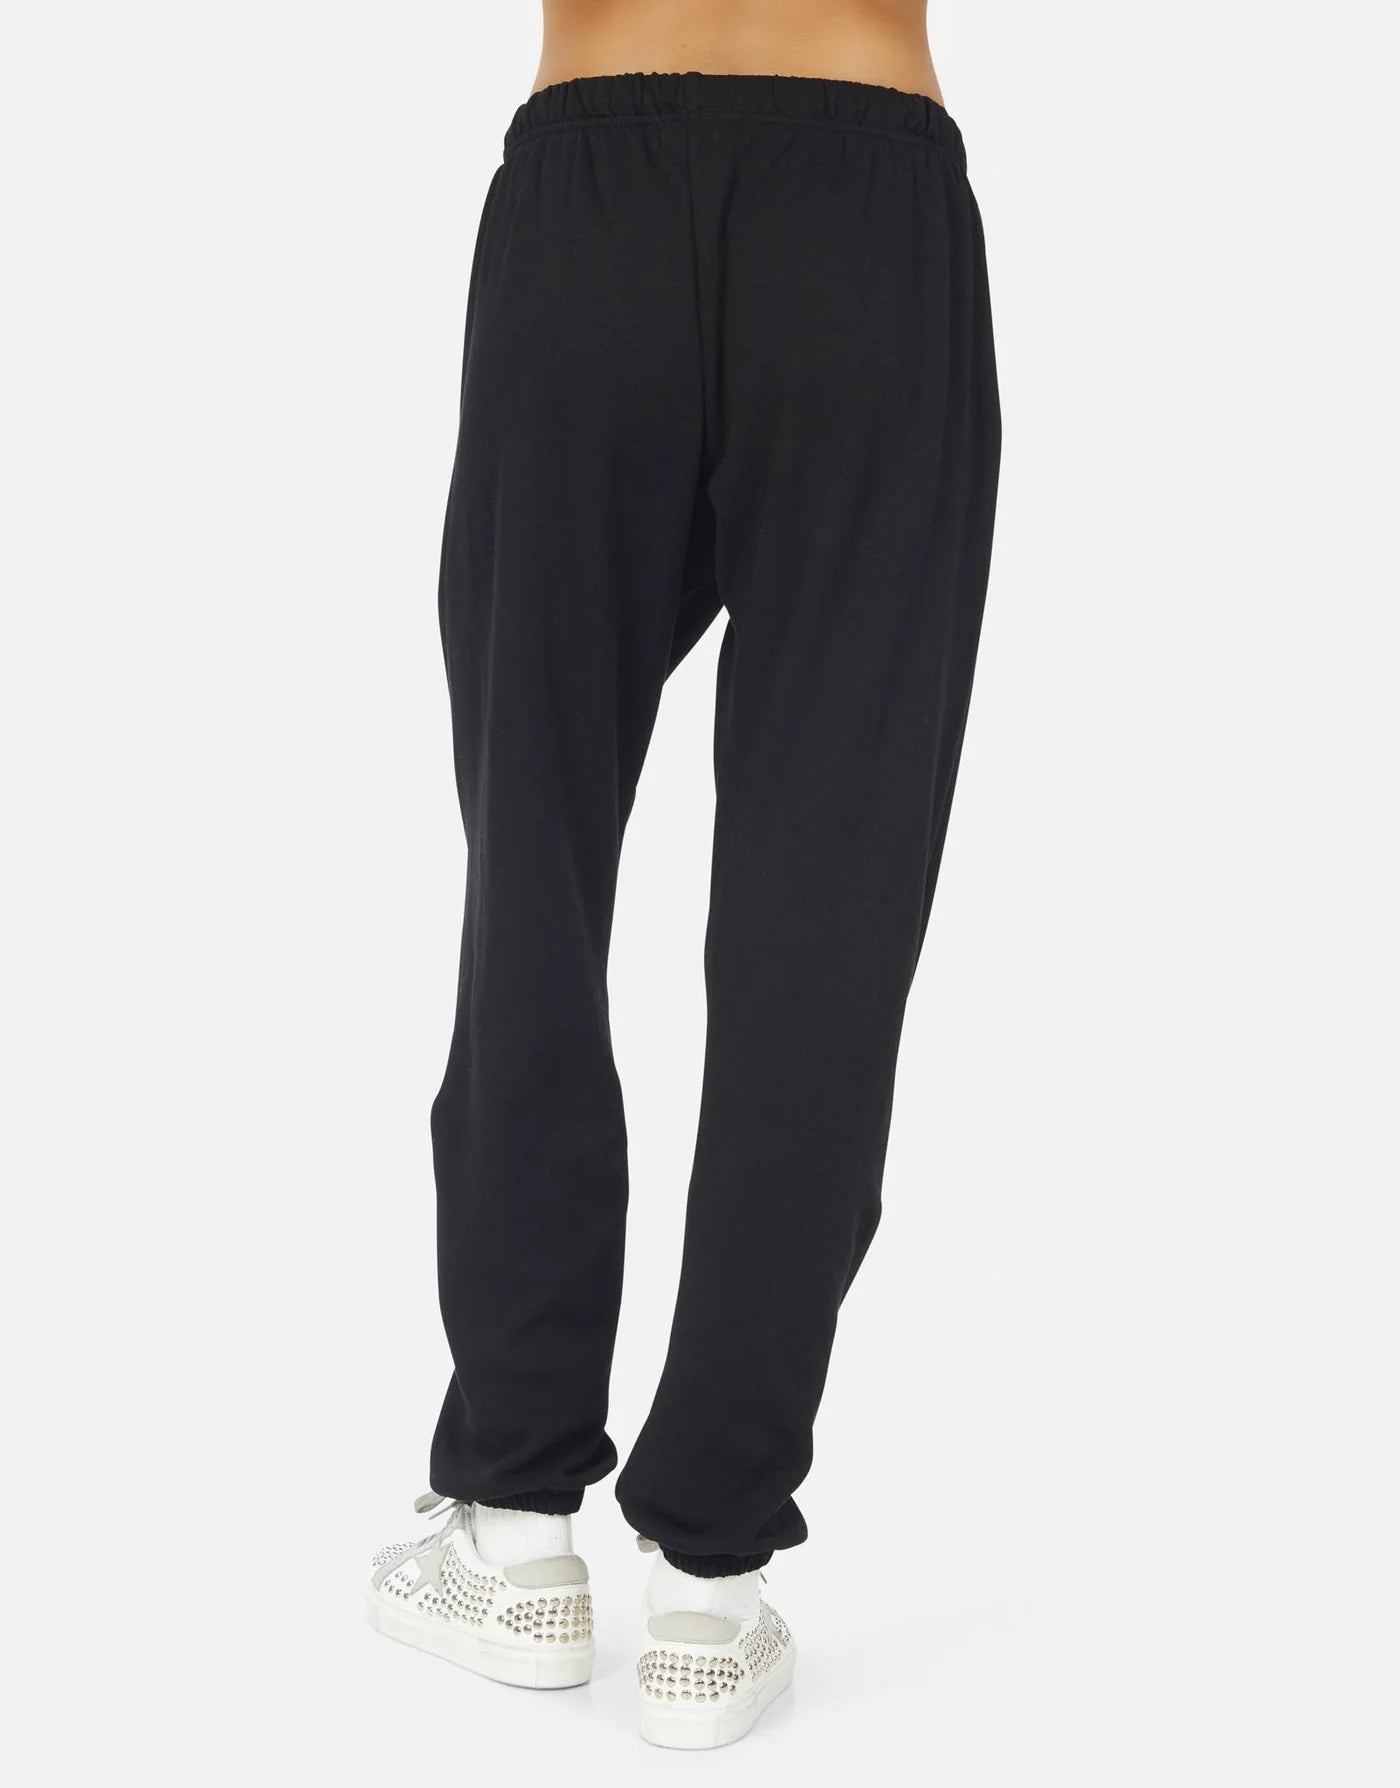 Viper Sweatpants in Black - Something about Sofia